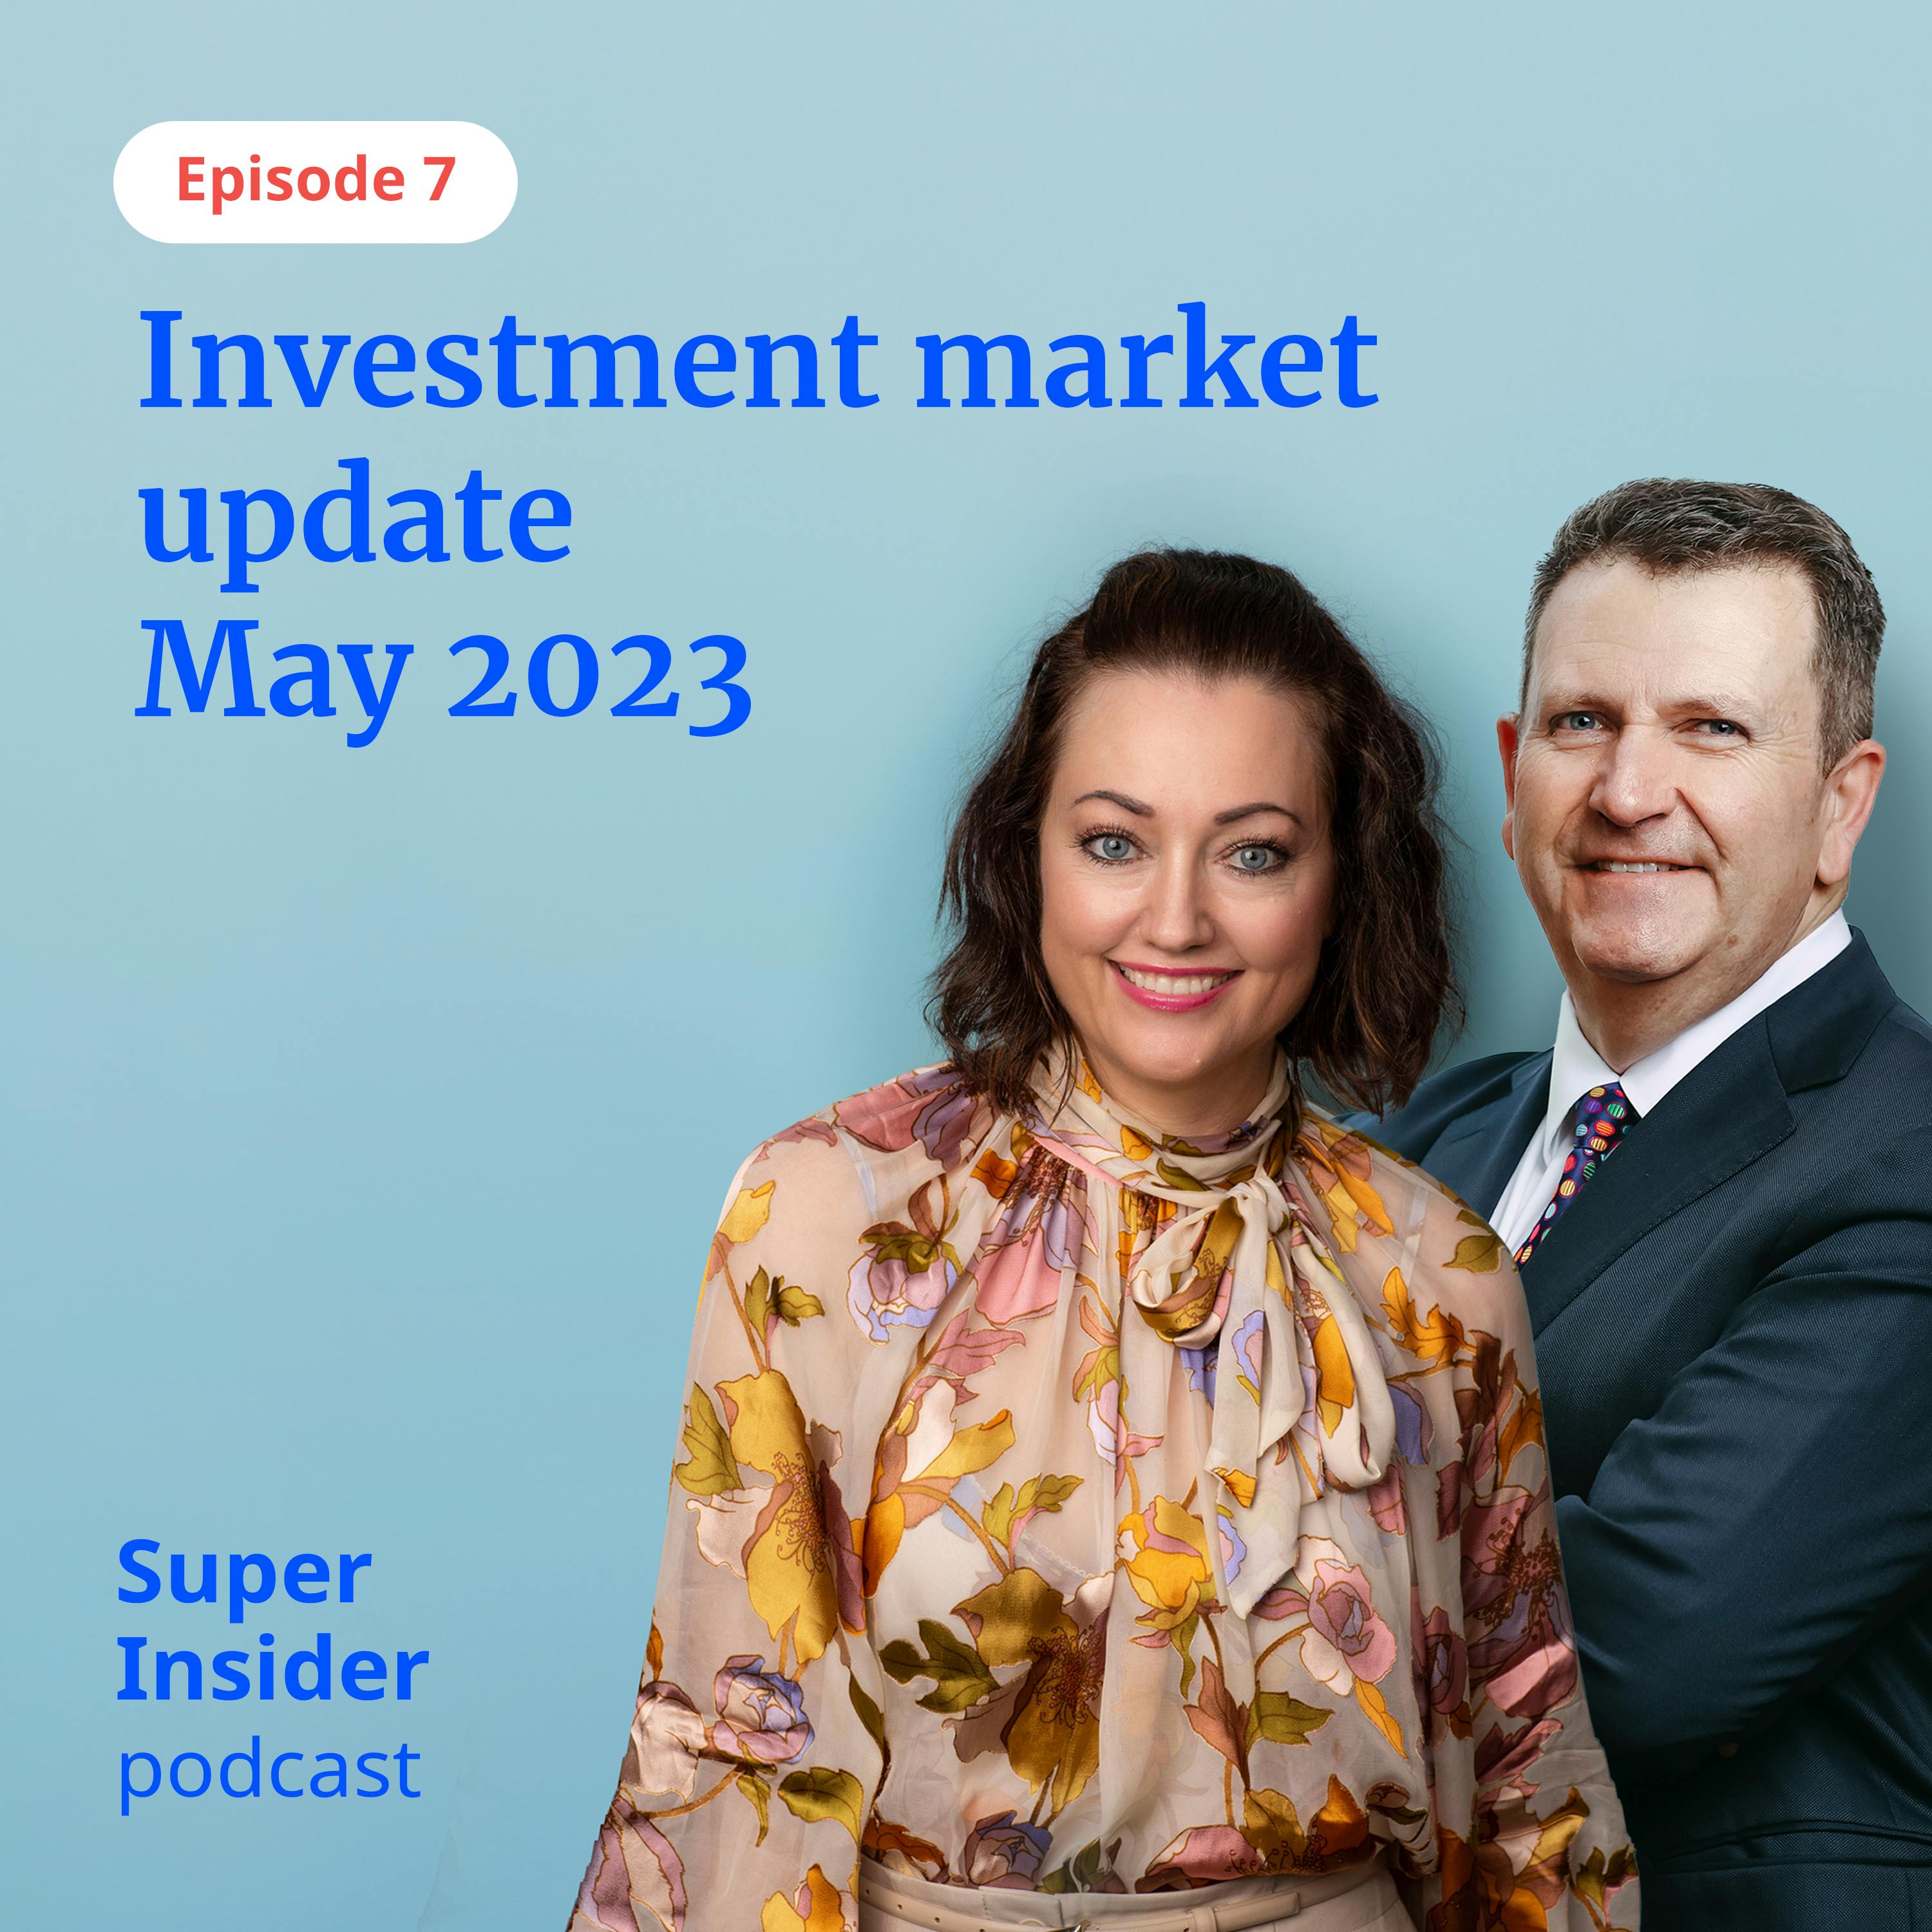 Investment market update May 2023 - is there light at the end of the tunnel?